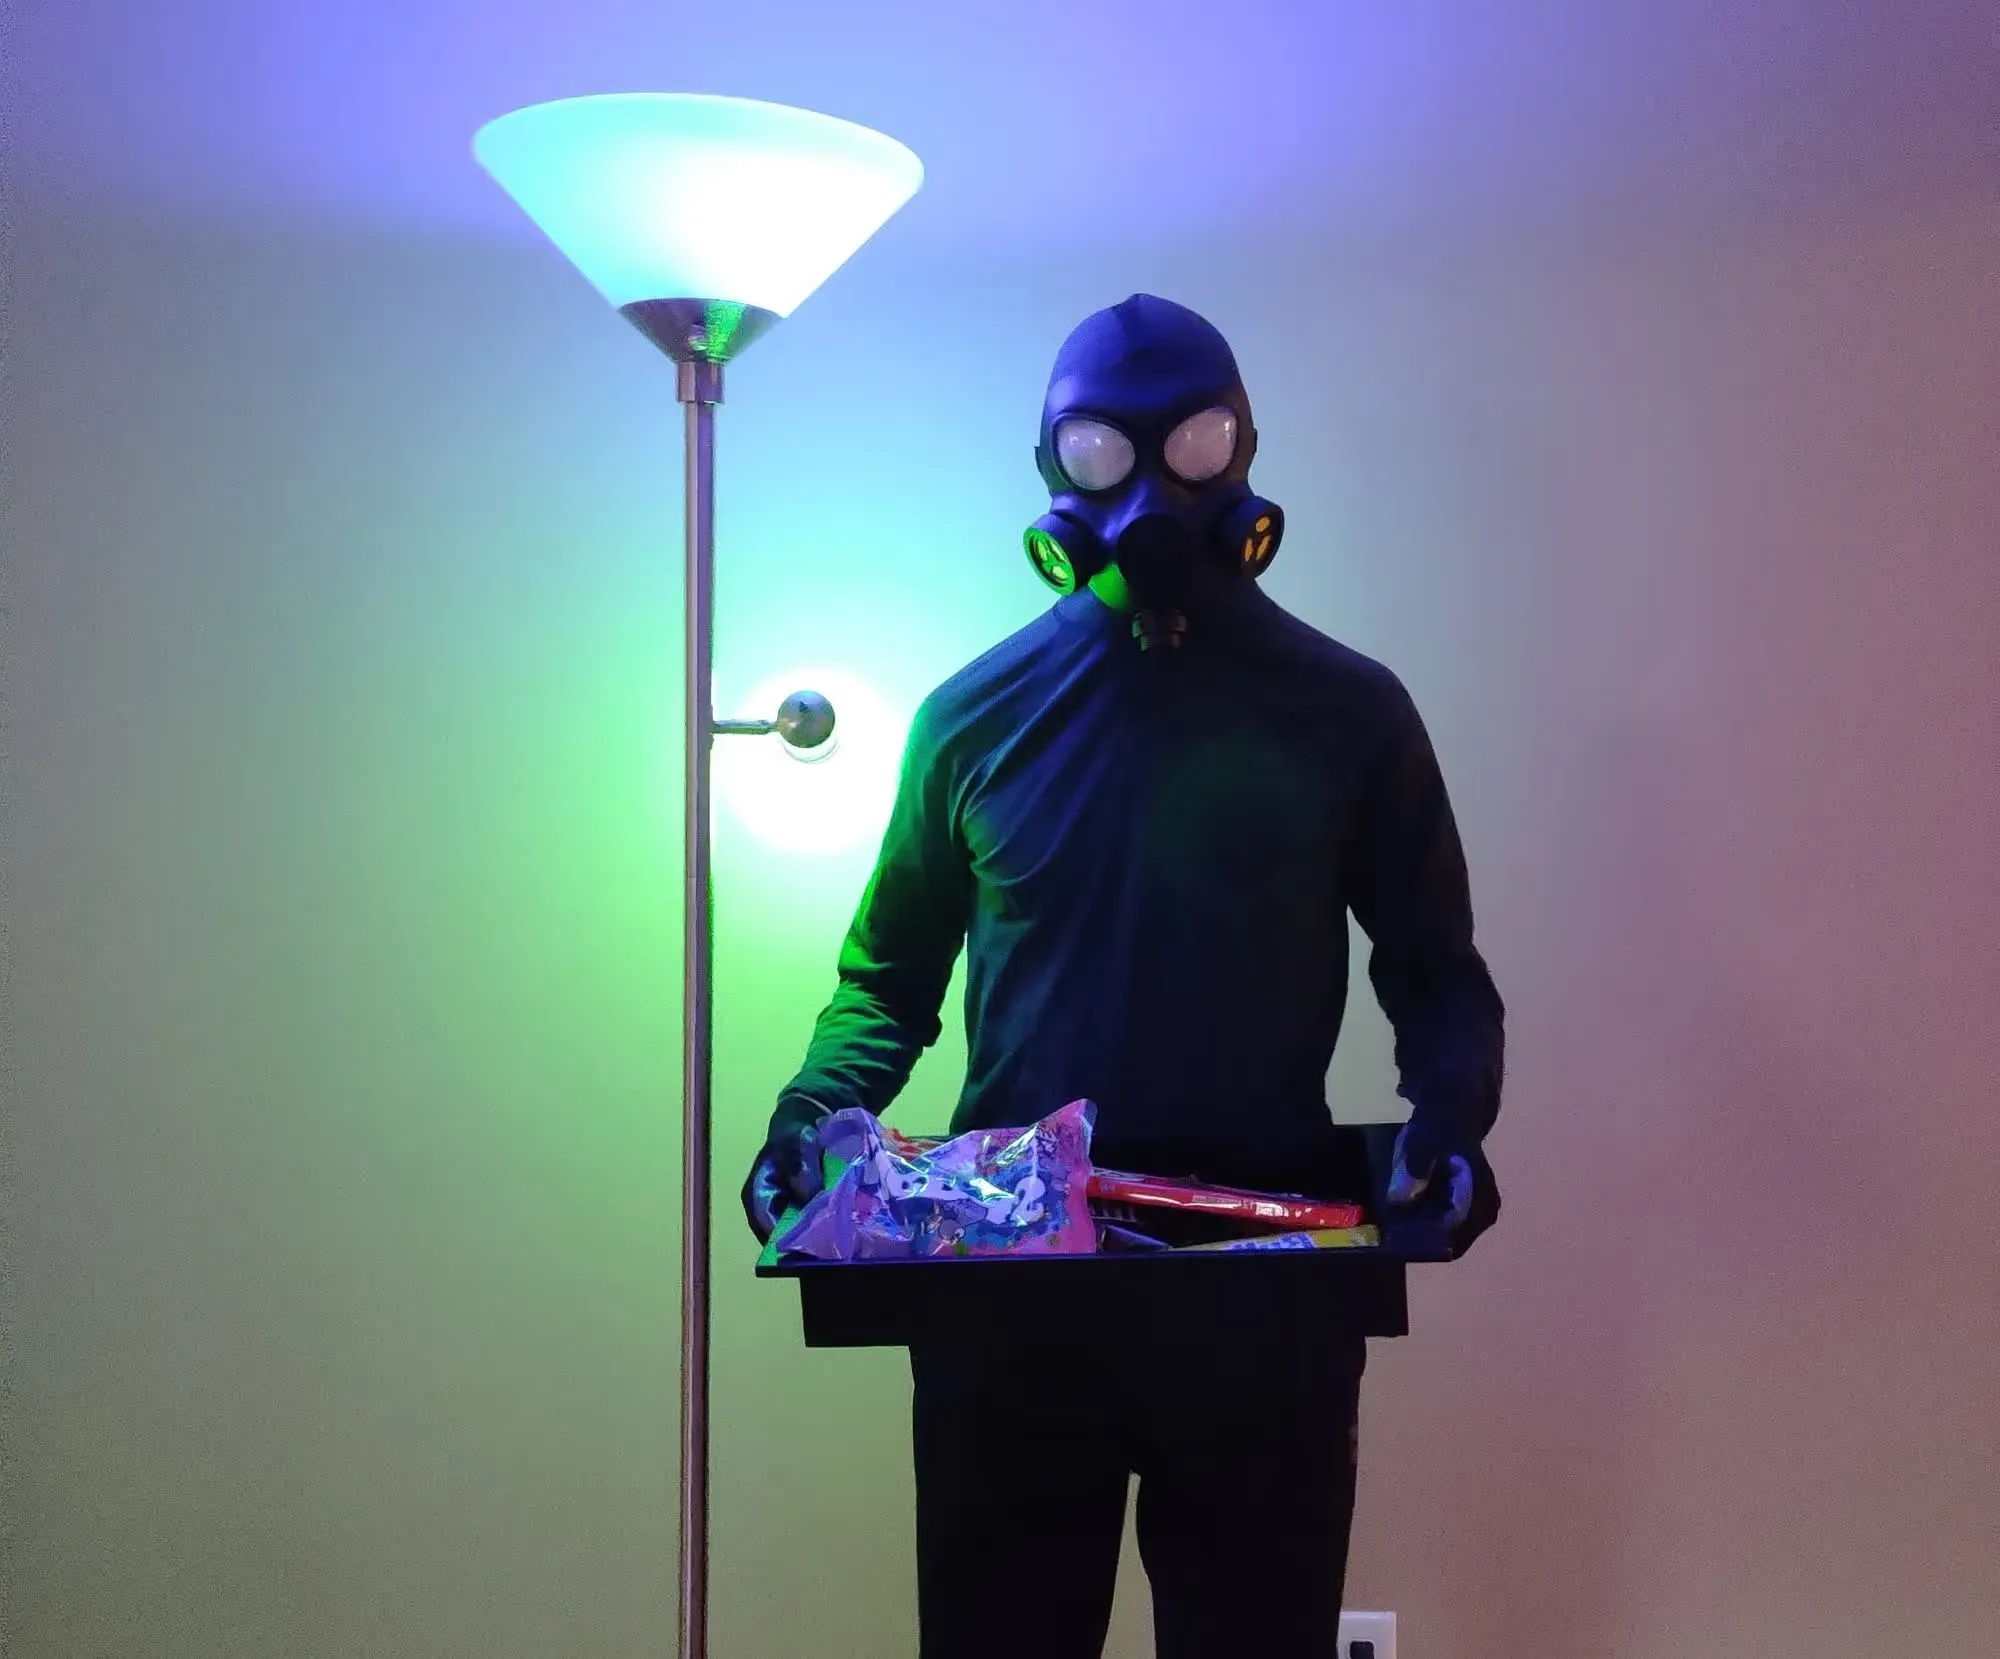 Matt stands inside wearing all black clothes, black gloves, and a black plastic gas mask. He holds a black tray filled with candy. Next to him stands a tall light fixture with his smart bulbs casting blue and green light over him.